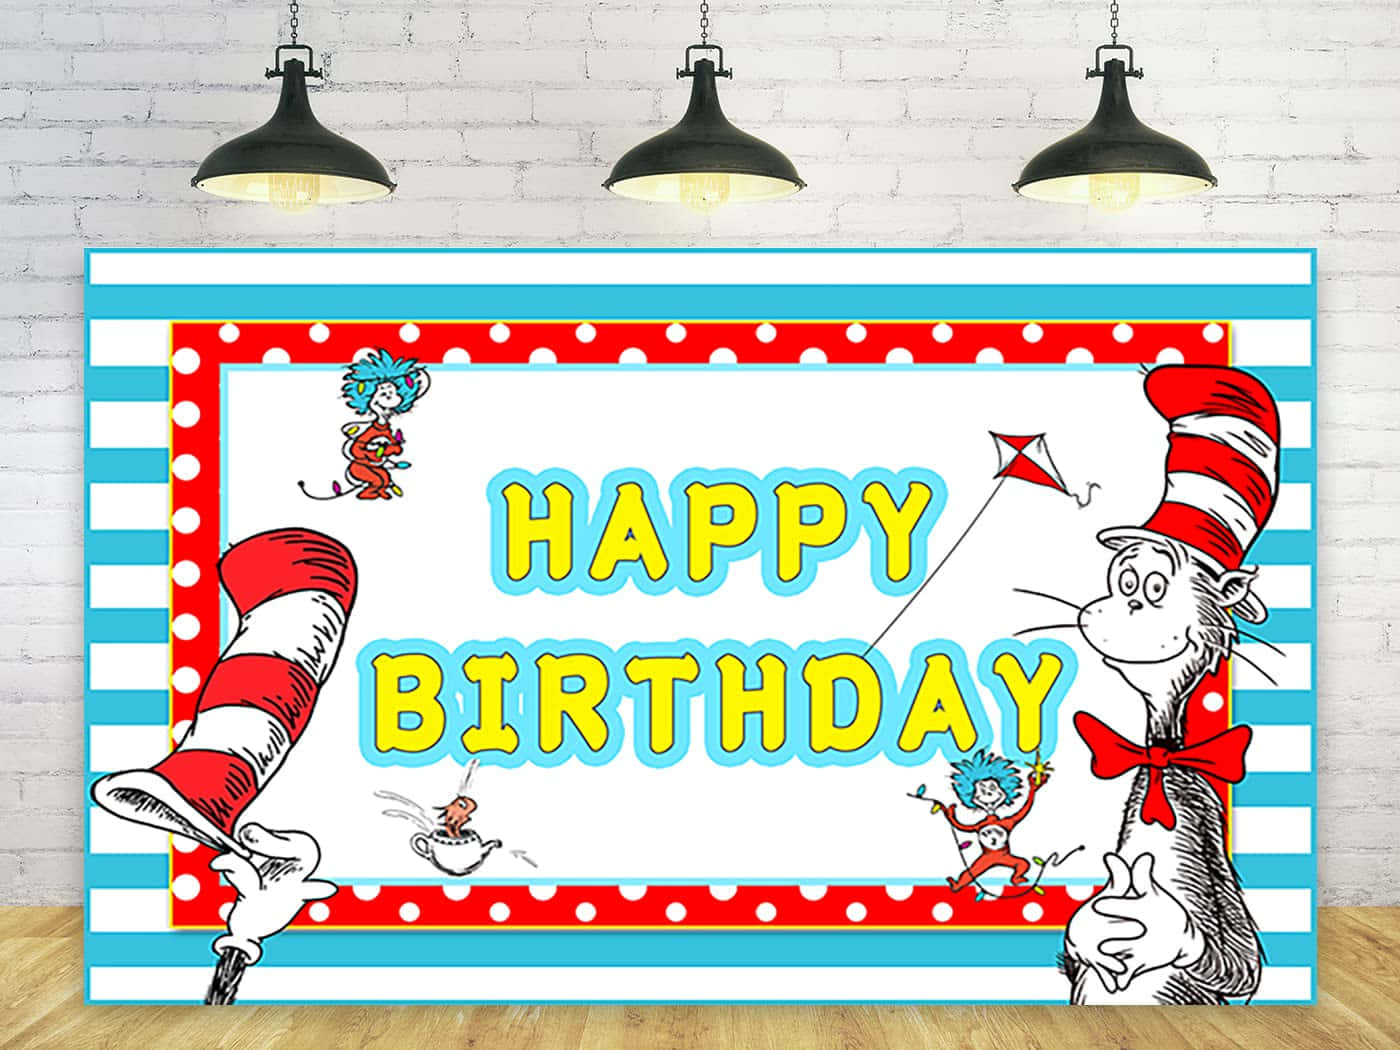 Download Dr Seuss Birthday Party Backdrop With A Cat In The Hat ...